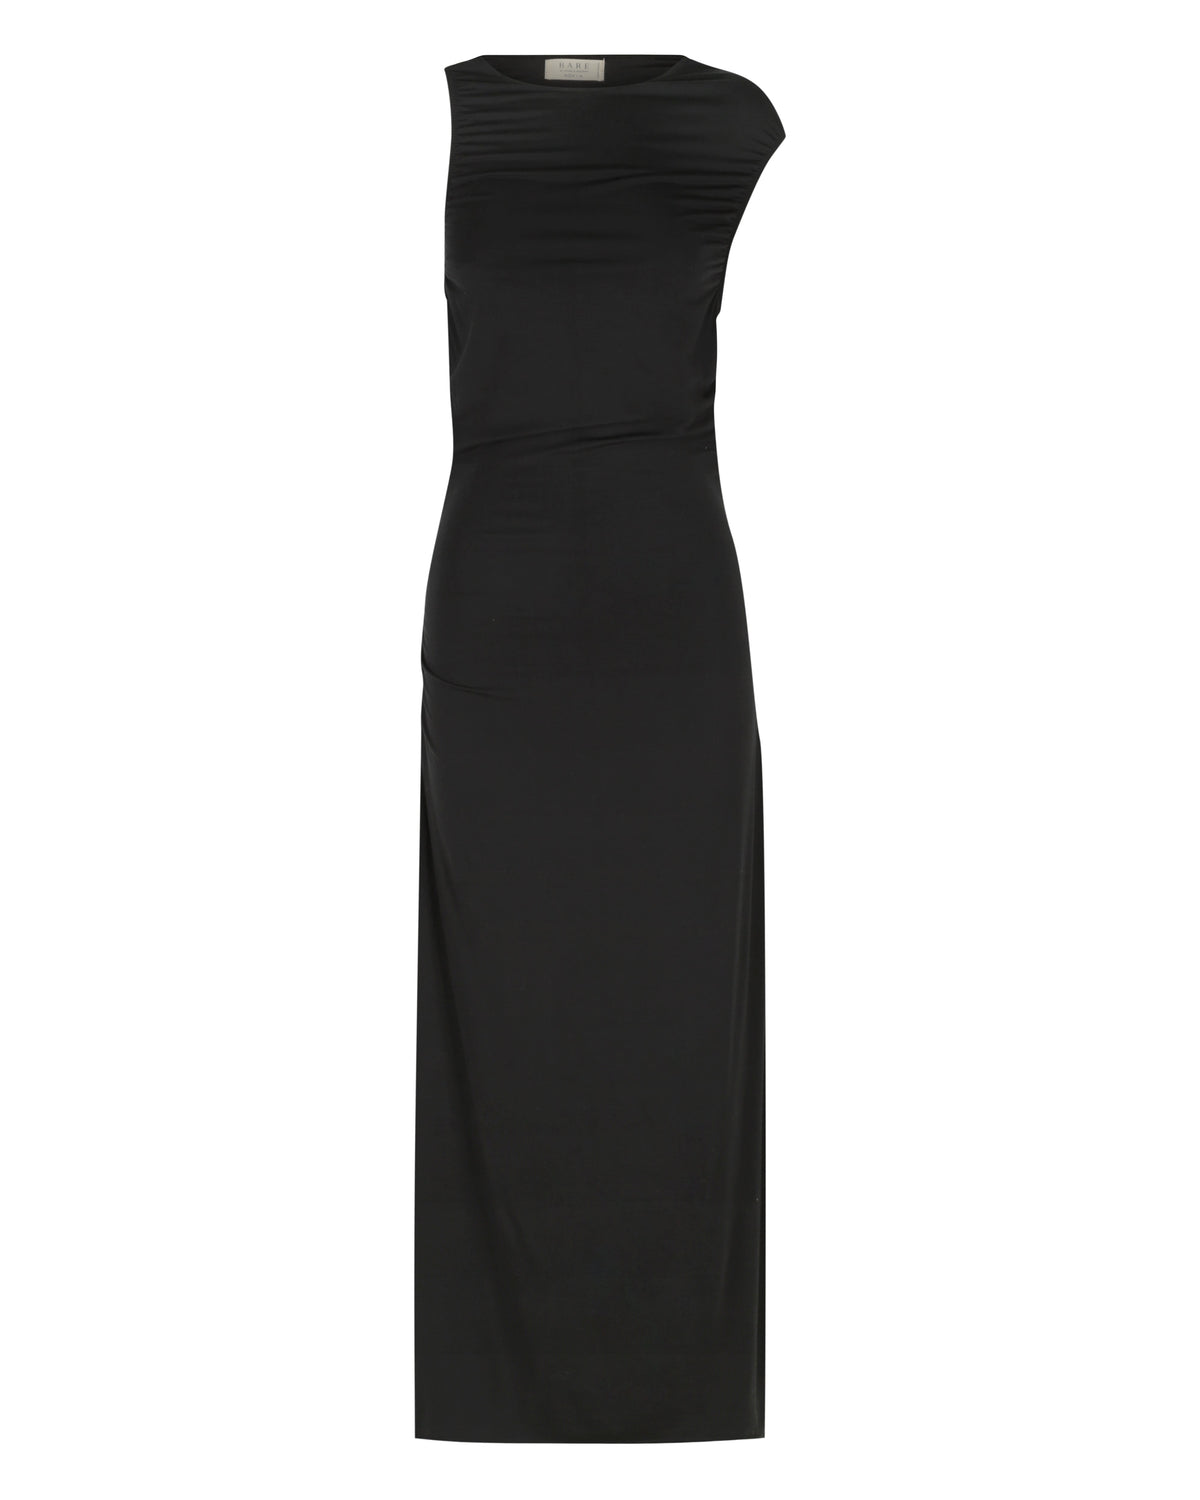 The Fitted Midi Dress